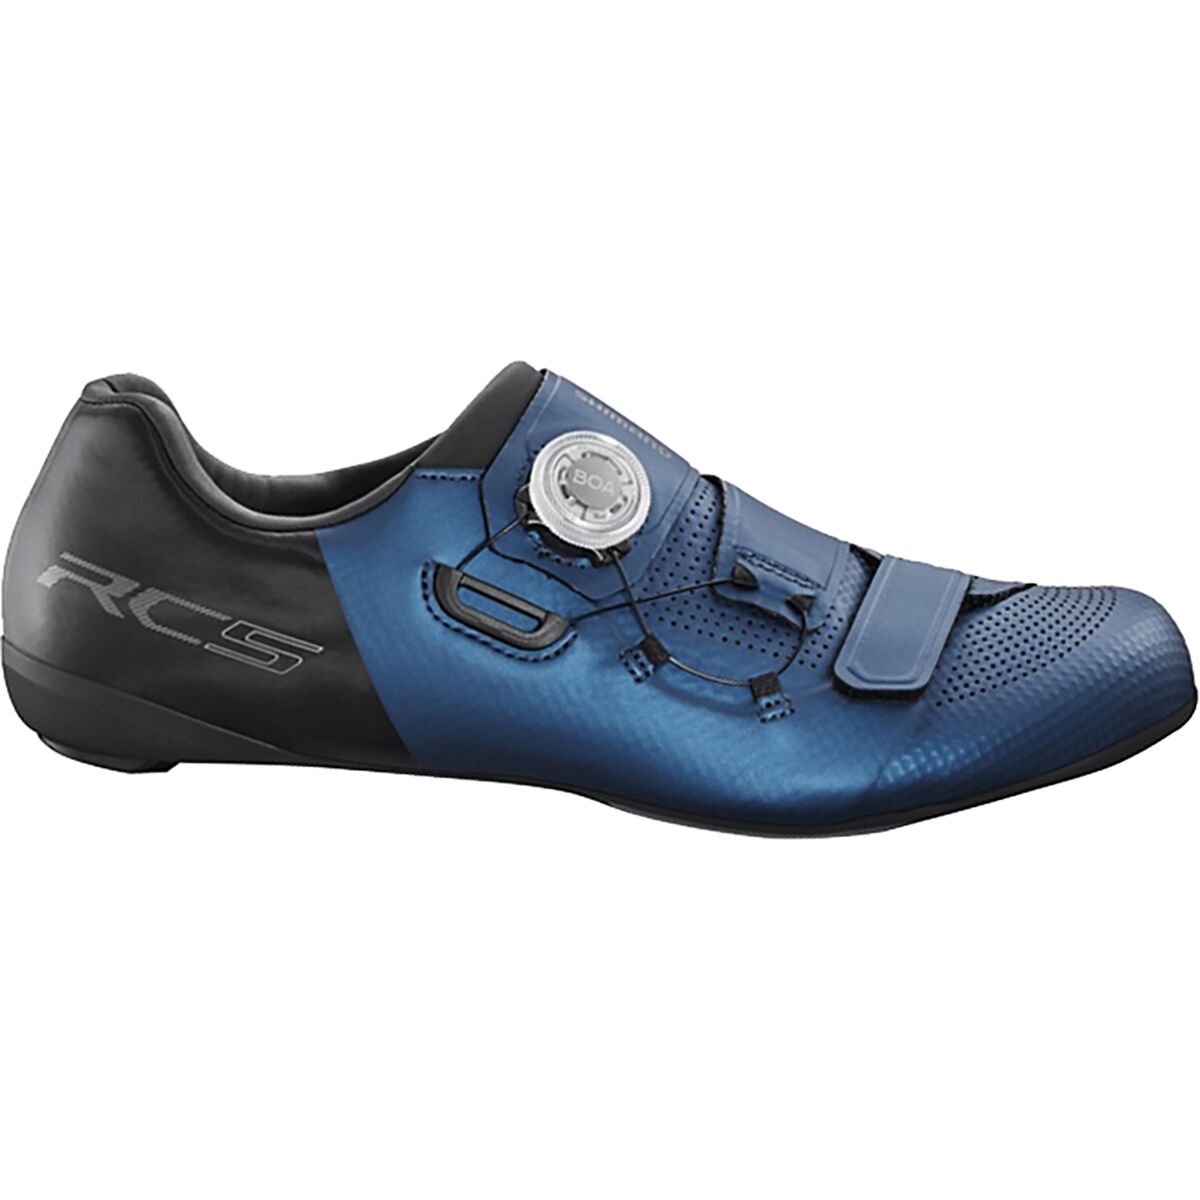 Shimano RC502 Limited Edition Cycling Shoe - Men's Blue 45.0